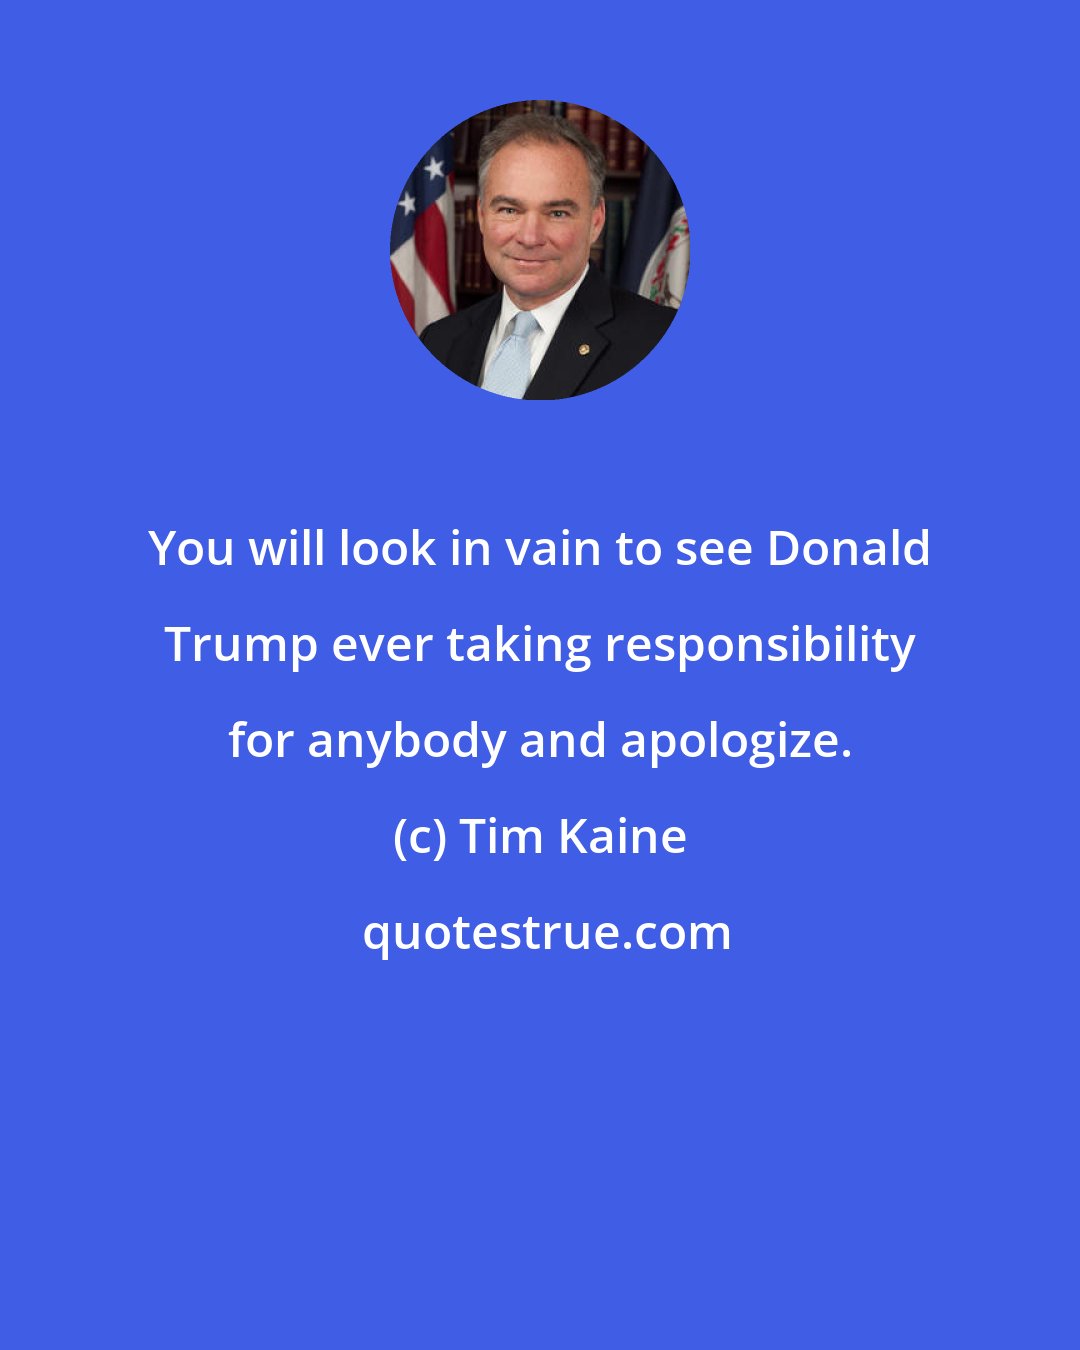 Tim Kaine: You will look in vain to see Donald Trump ever taking responsibility for anybody and apologize.